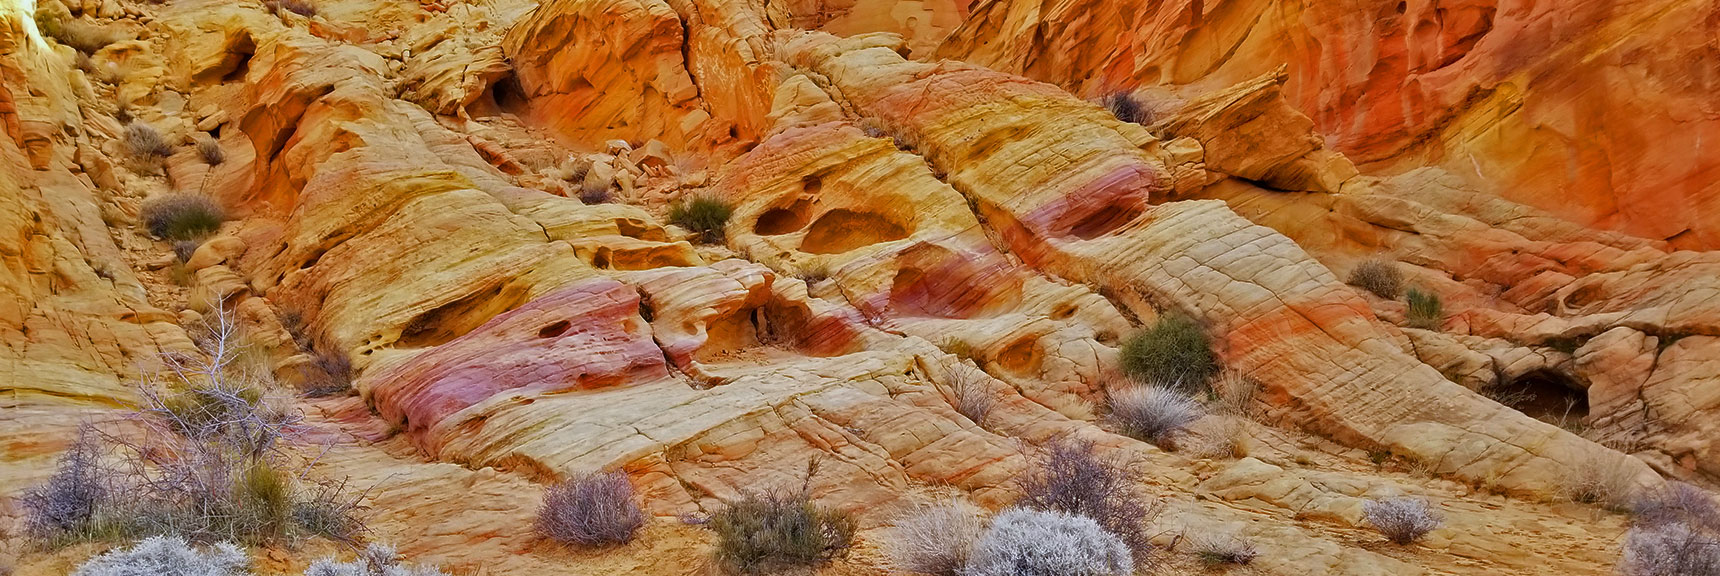 Rainbow Vista Trail in Valley of Fire State Park, Nevada, View of Colorful Rocks